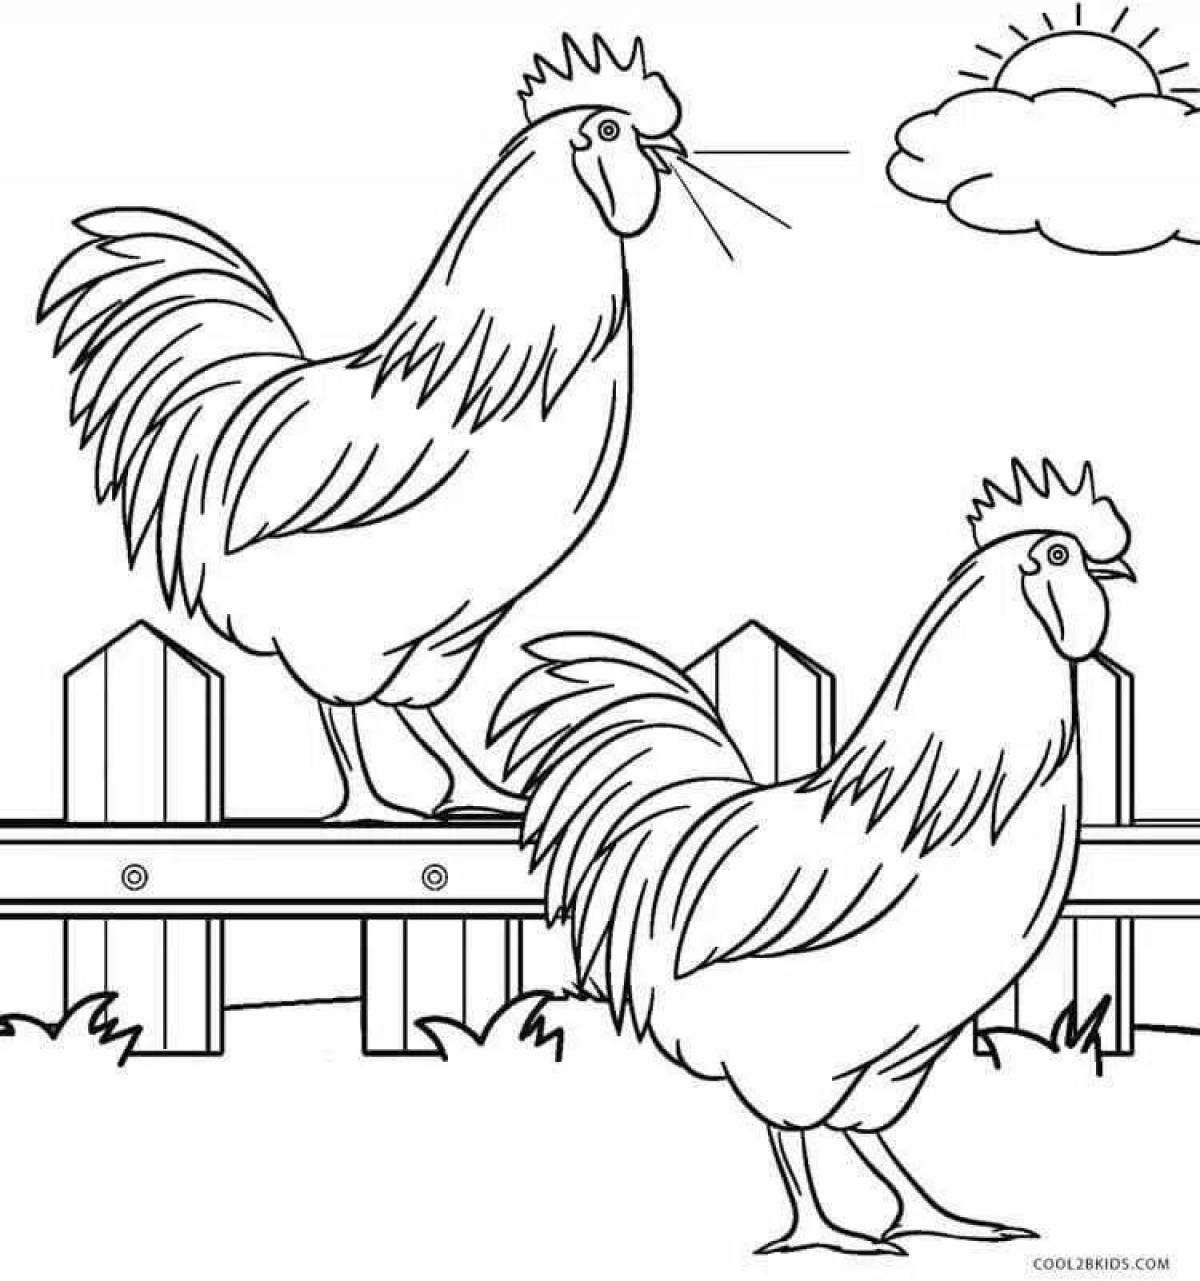 Colorful rooster coloring page